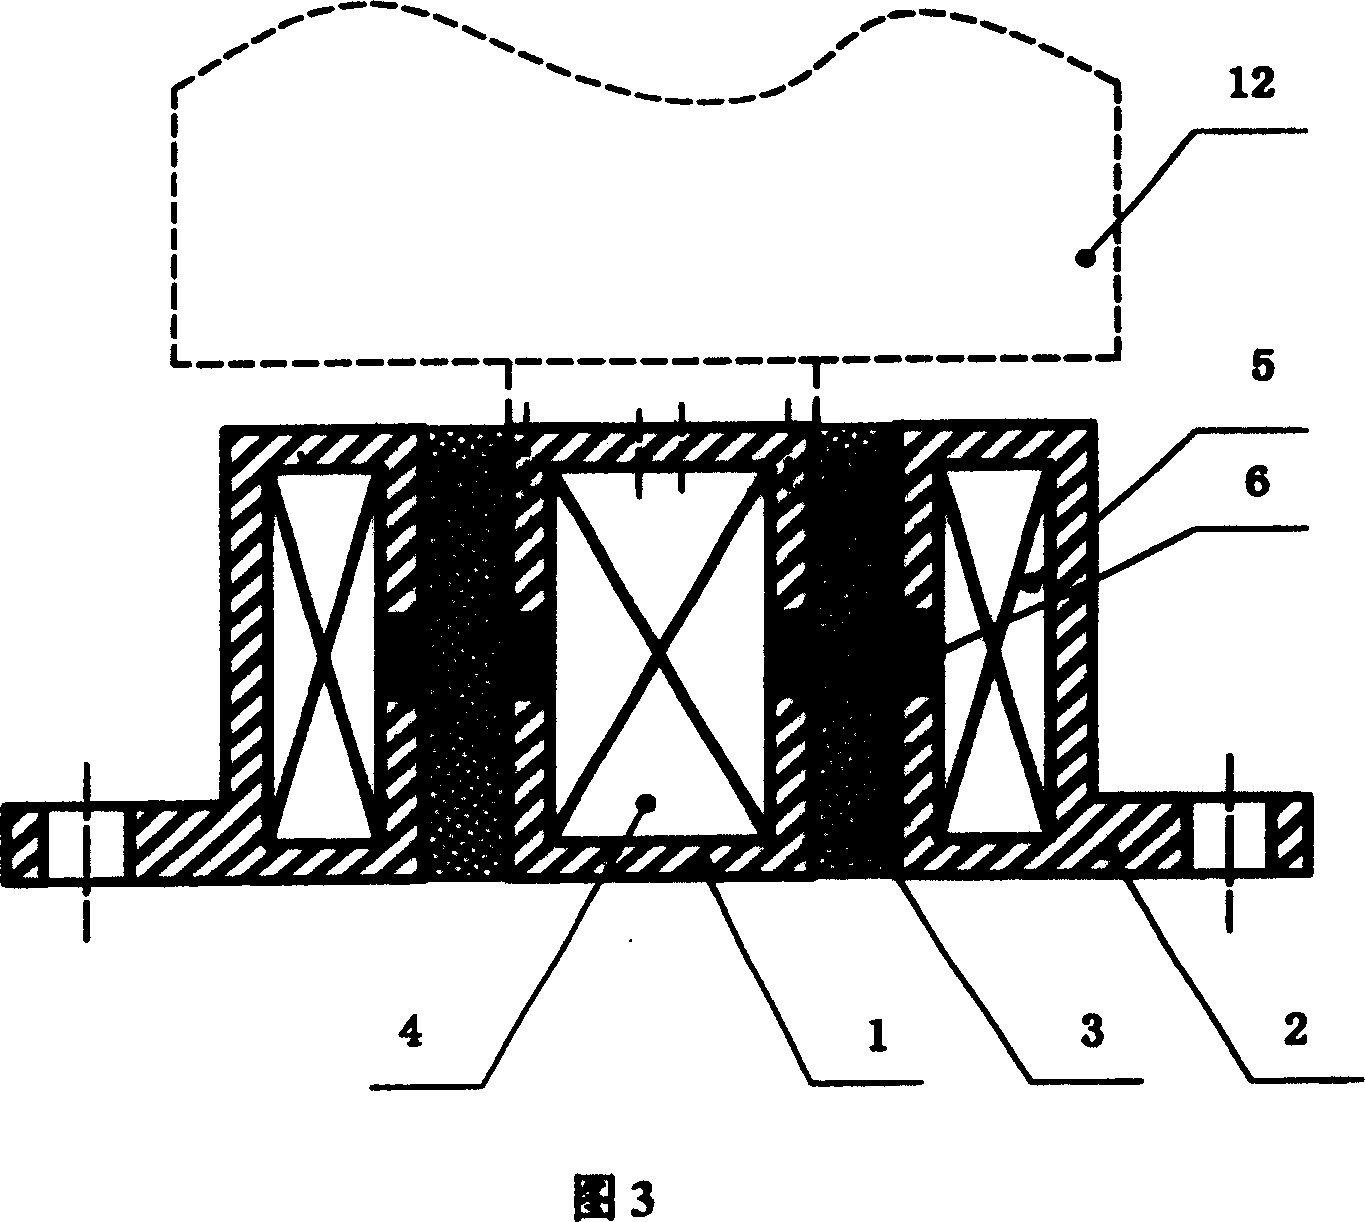 Vibration damper with controllable stiffness and damping